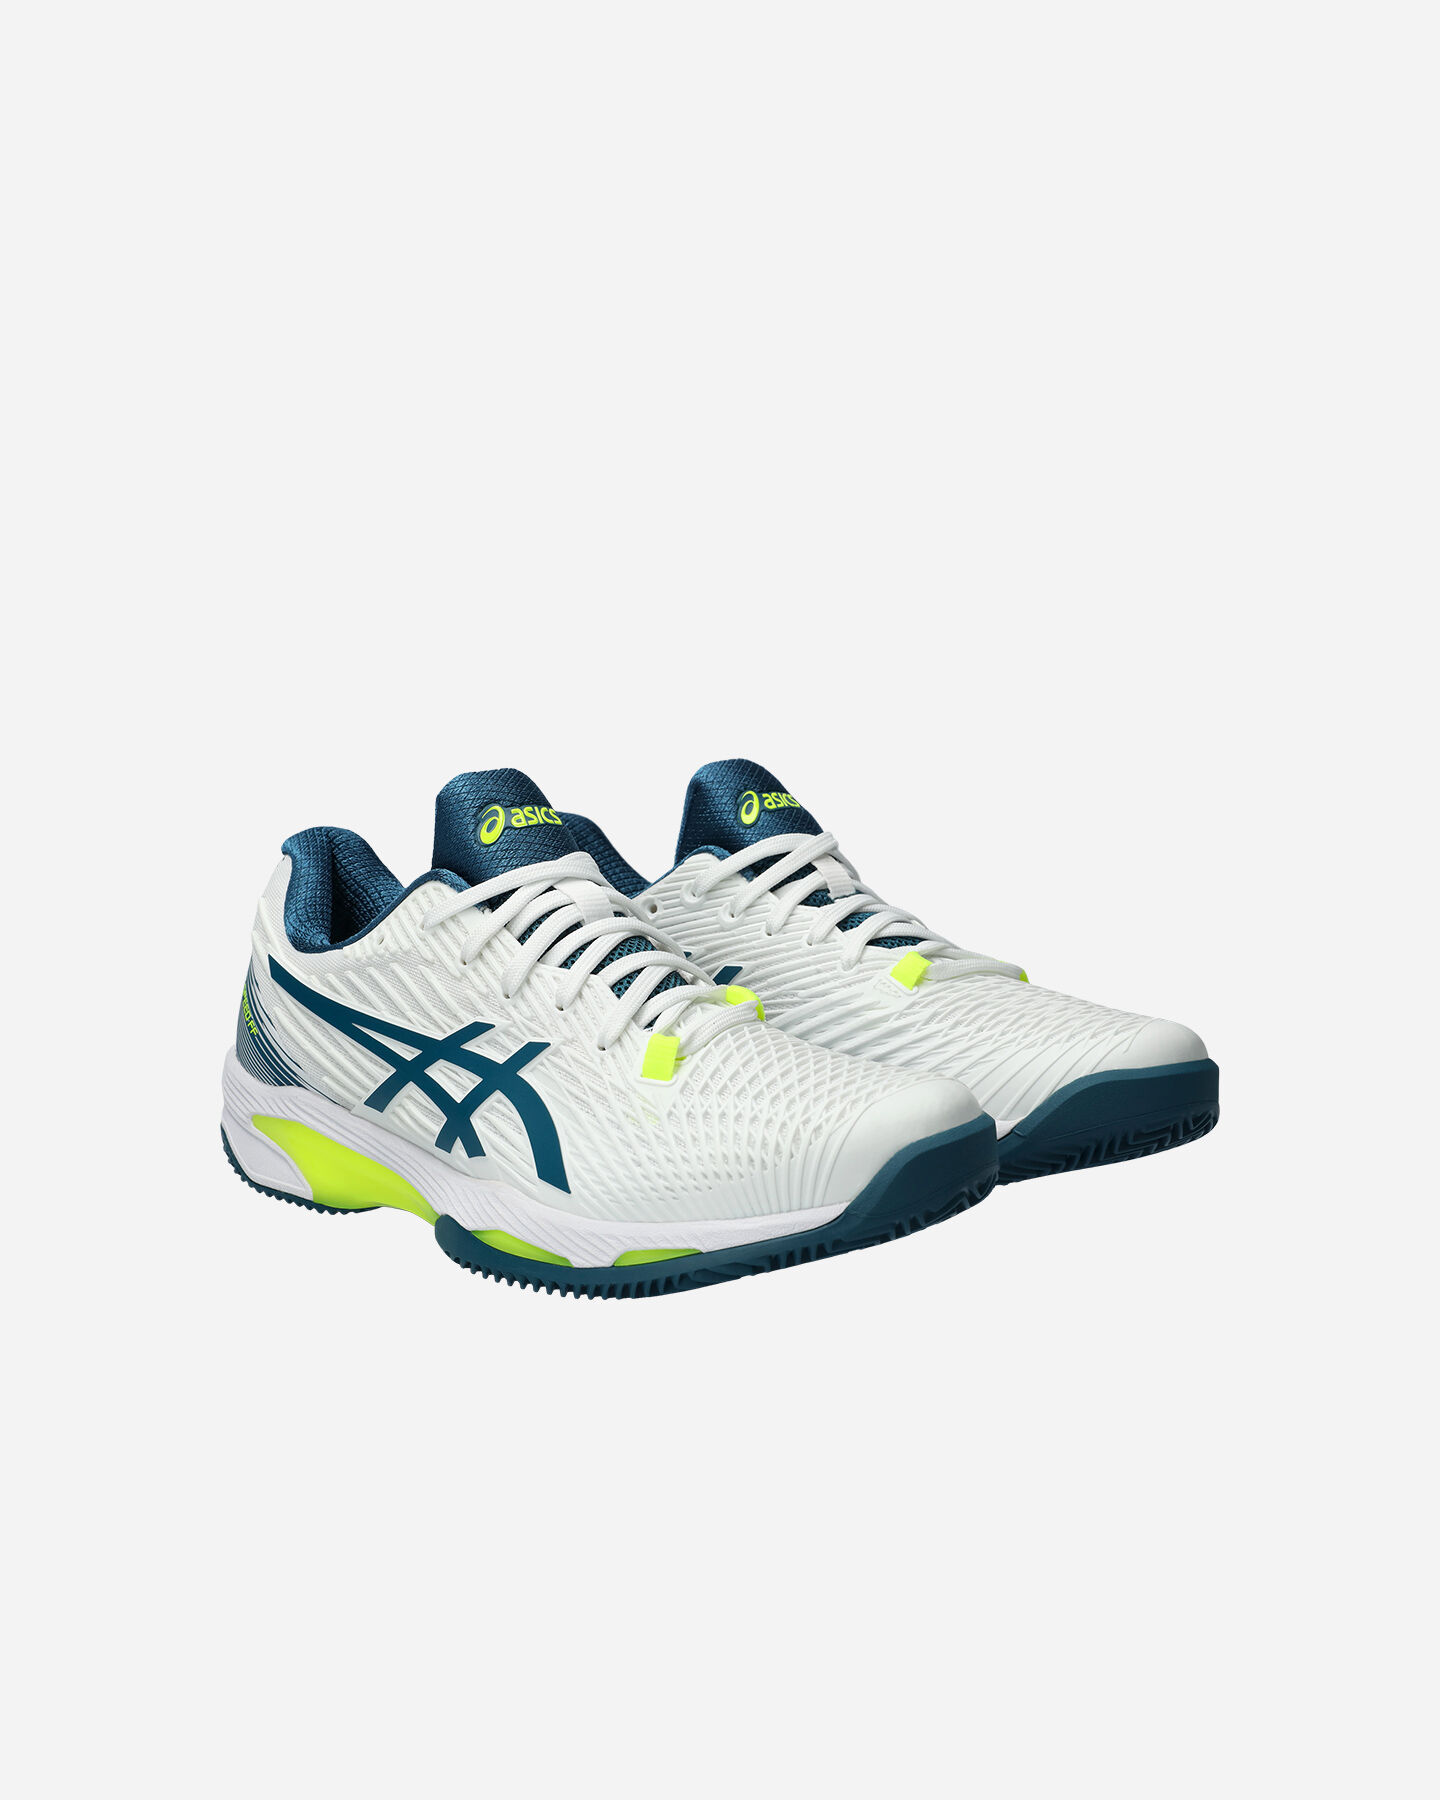  Scarpe tennis ASICS SOLUTION SPEED FF 2 CLAY M S5585286|102|7H scatto 1